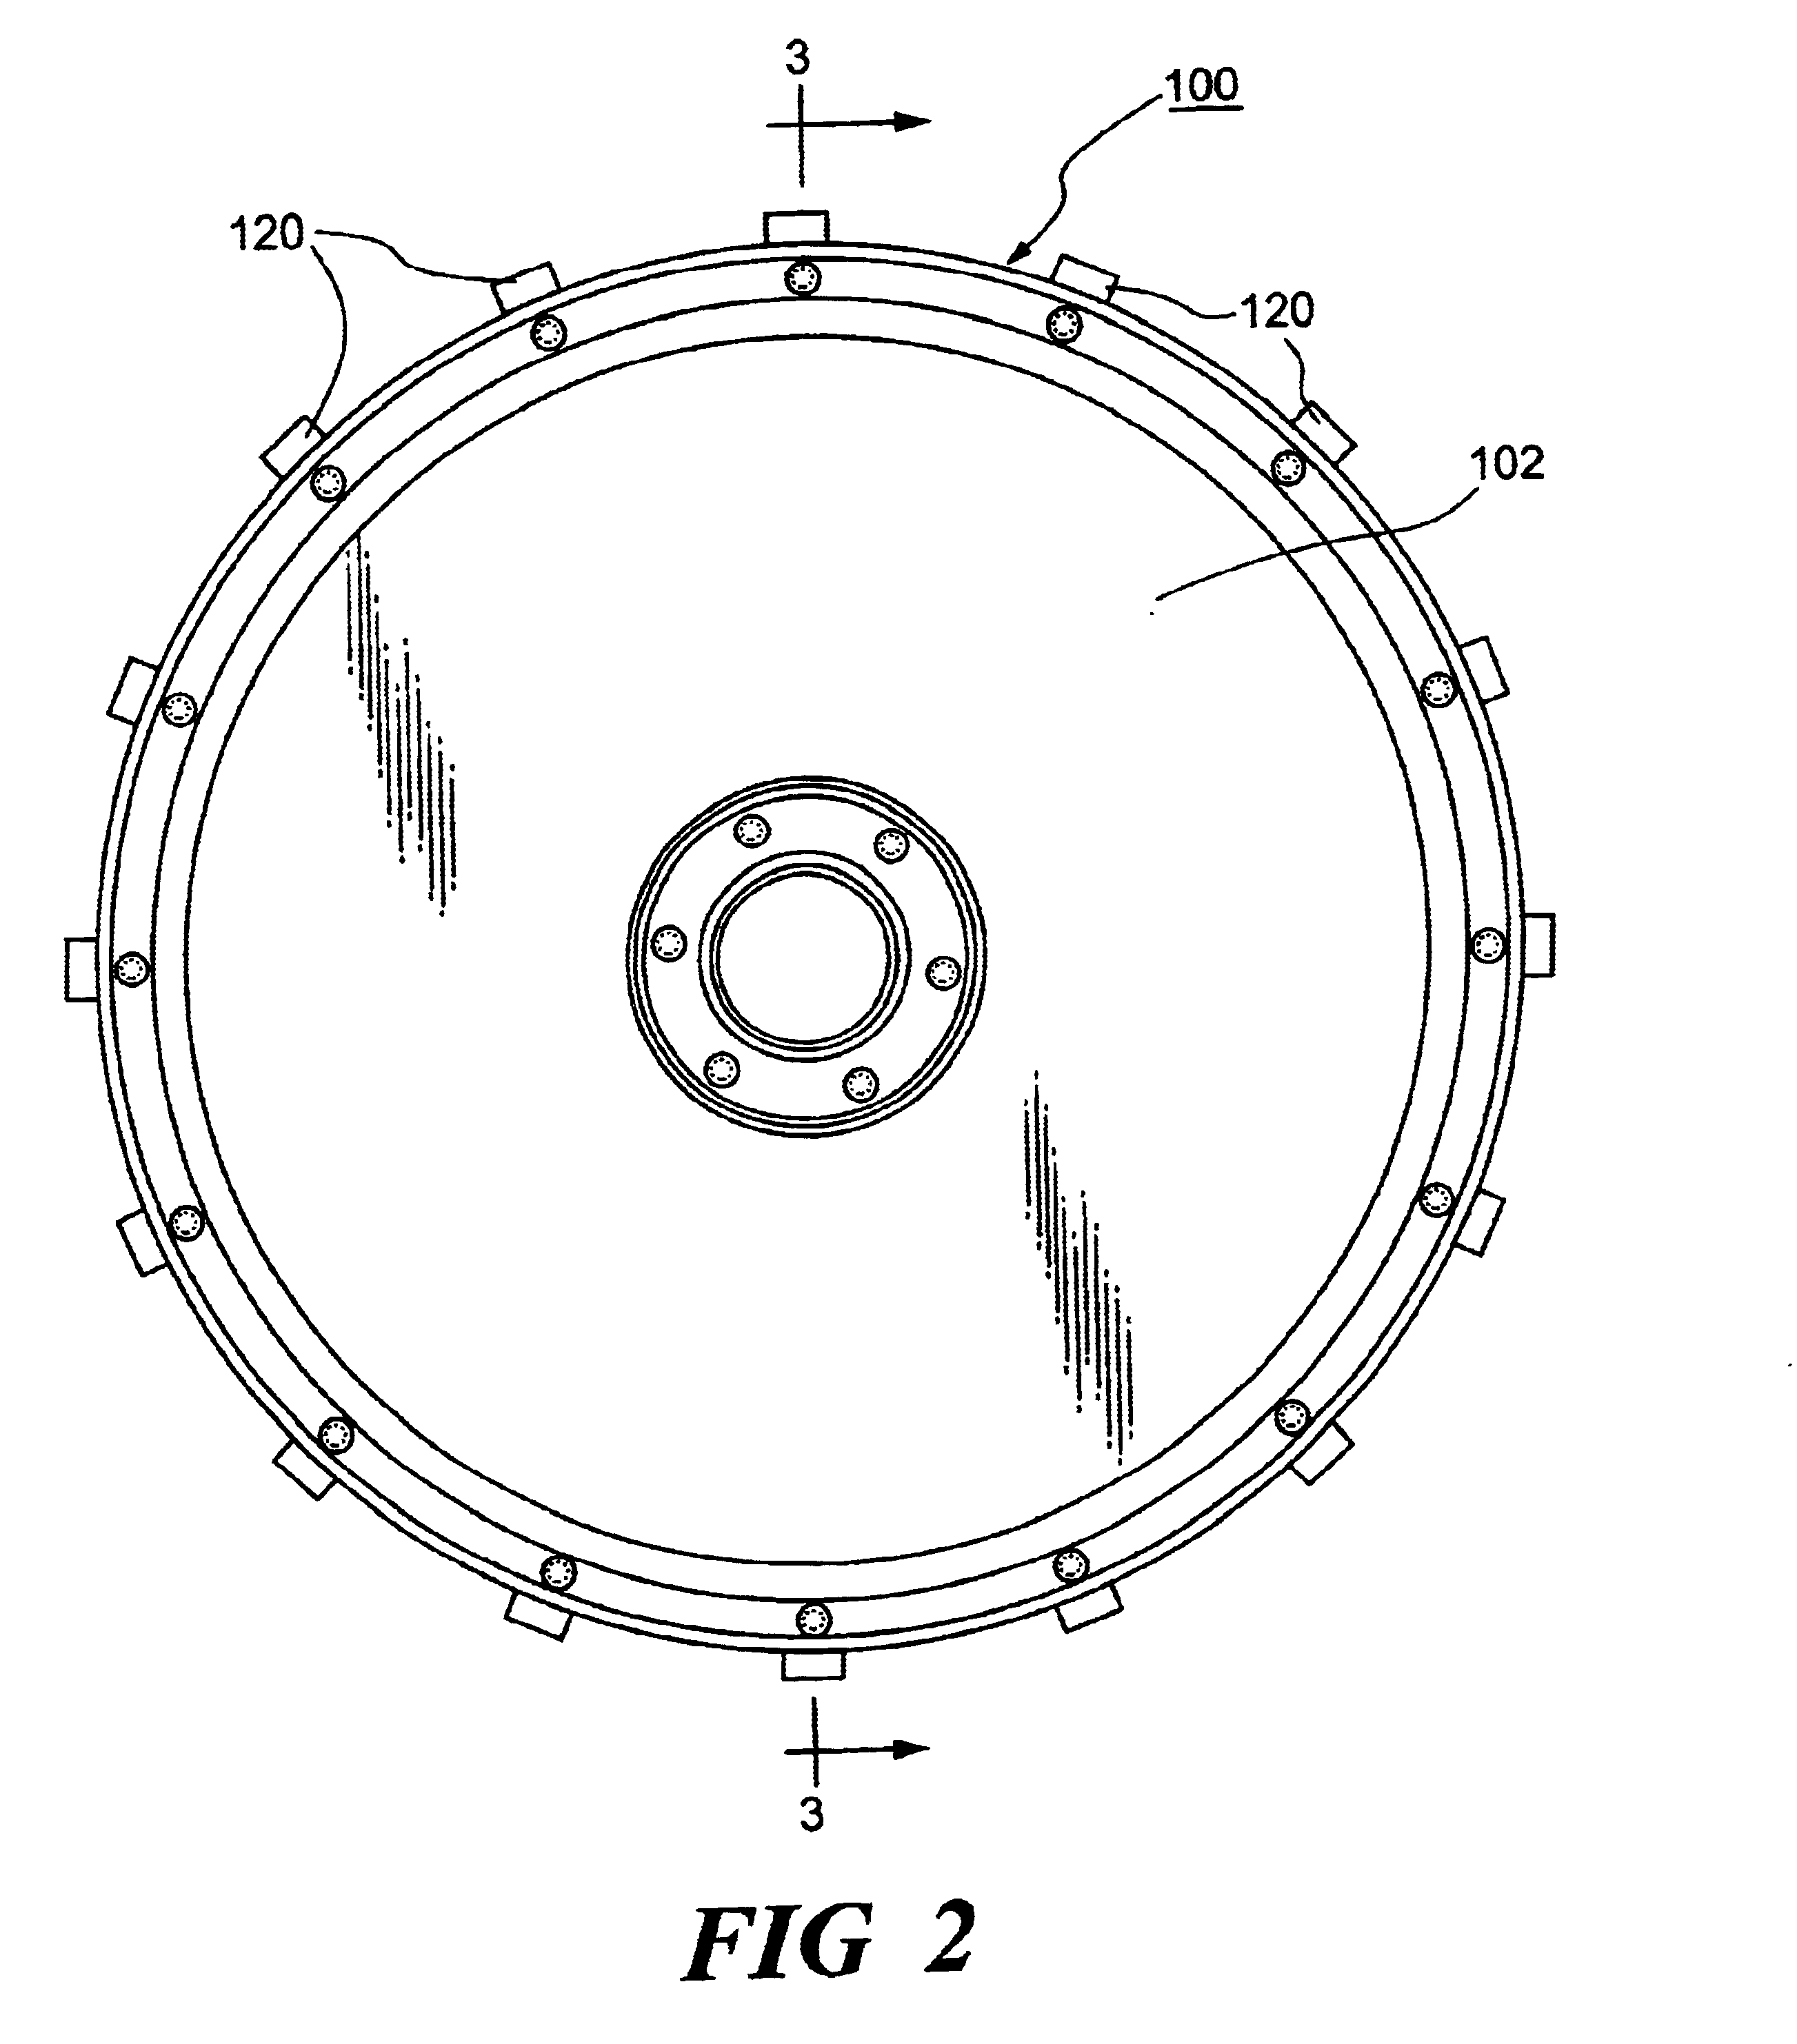 Axial gap motor-generator for high speed operation